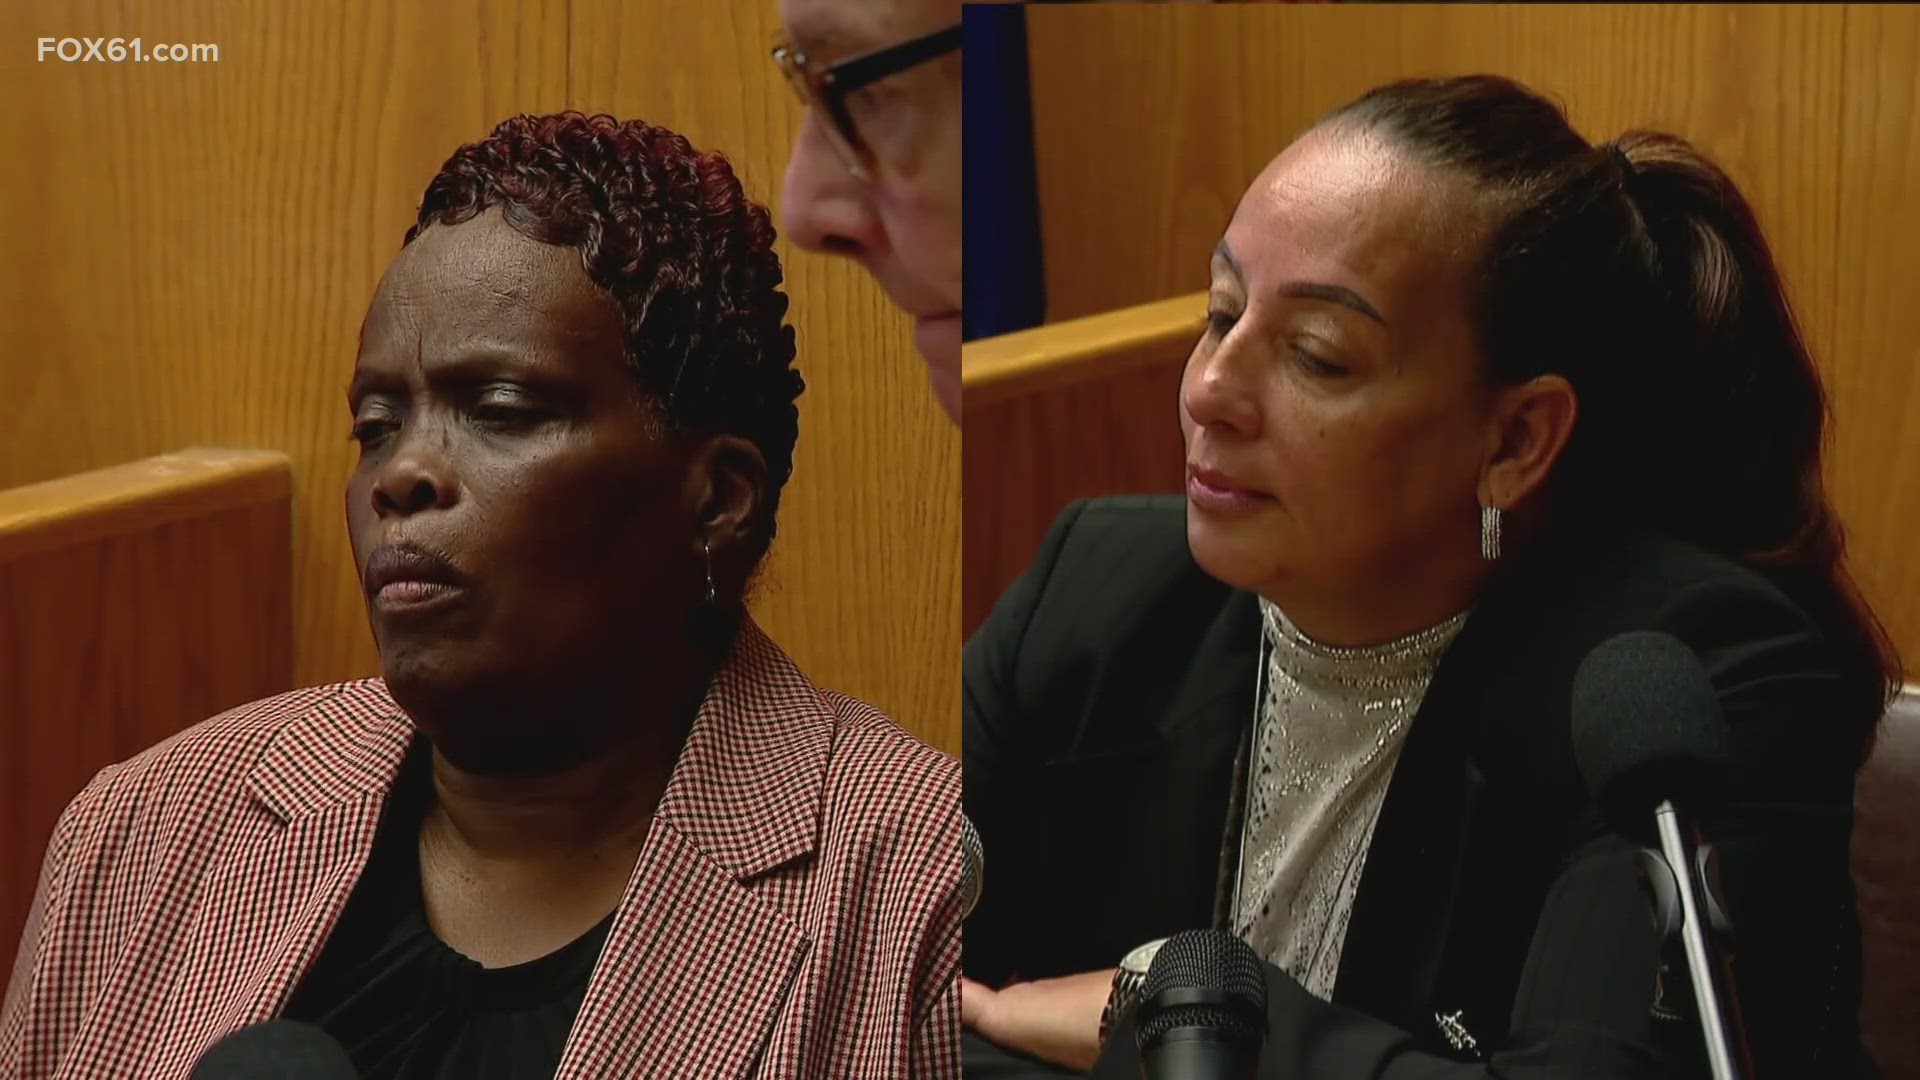 The group "Fight Voter Fraud" is attempting to get Wanda Geter and Anita Martinez arrested for their hand in the Bridgeport ballot scandal.